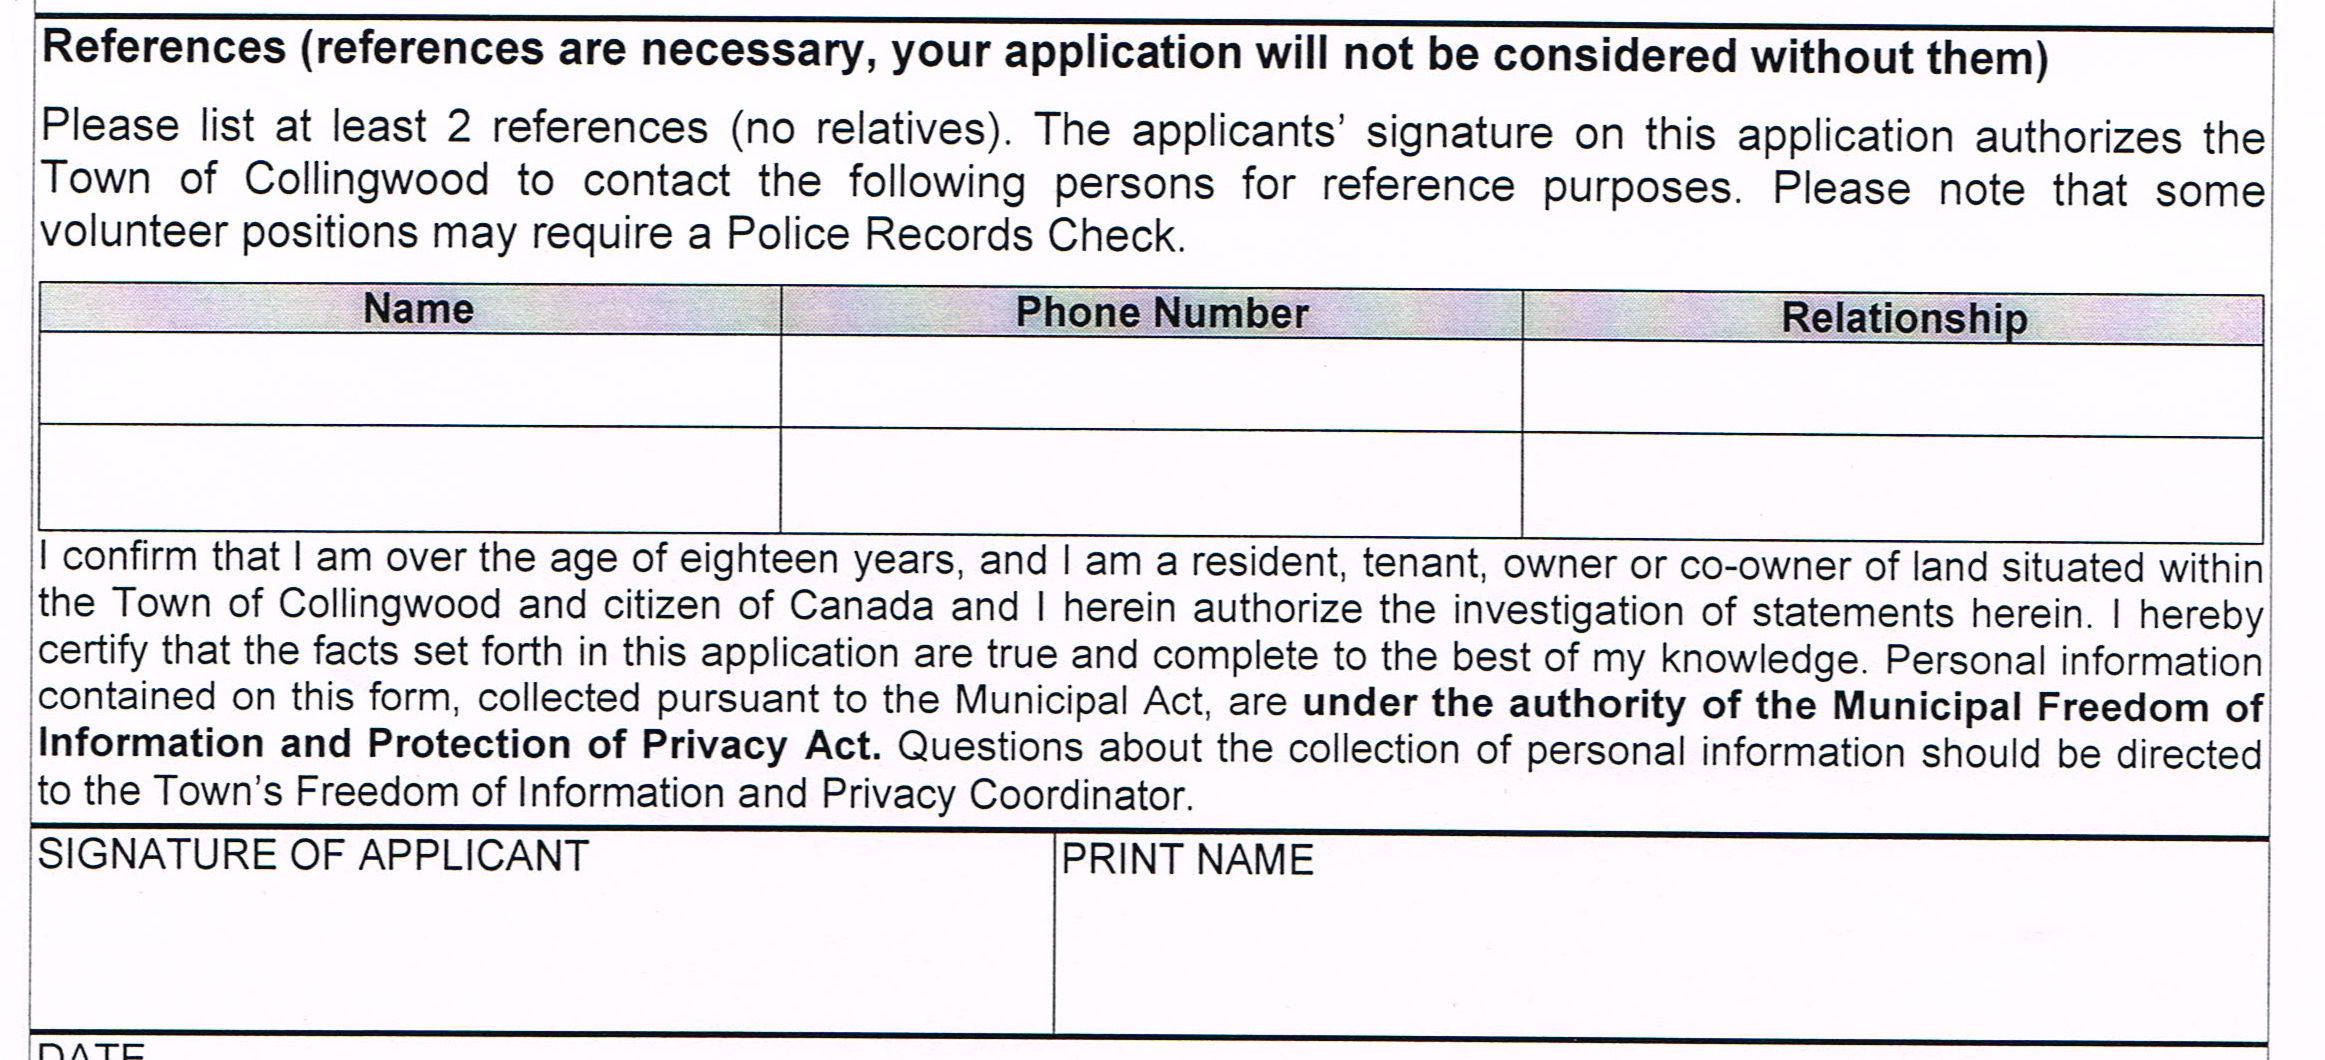 Application page 2